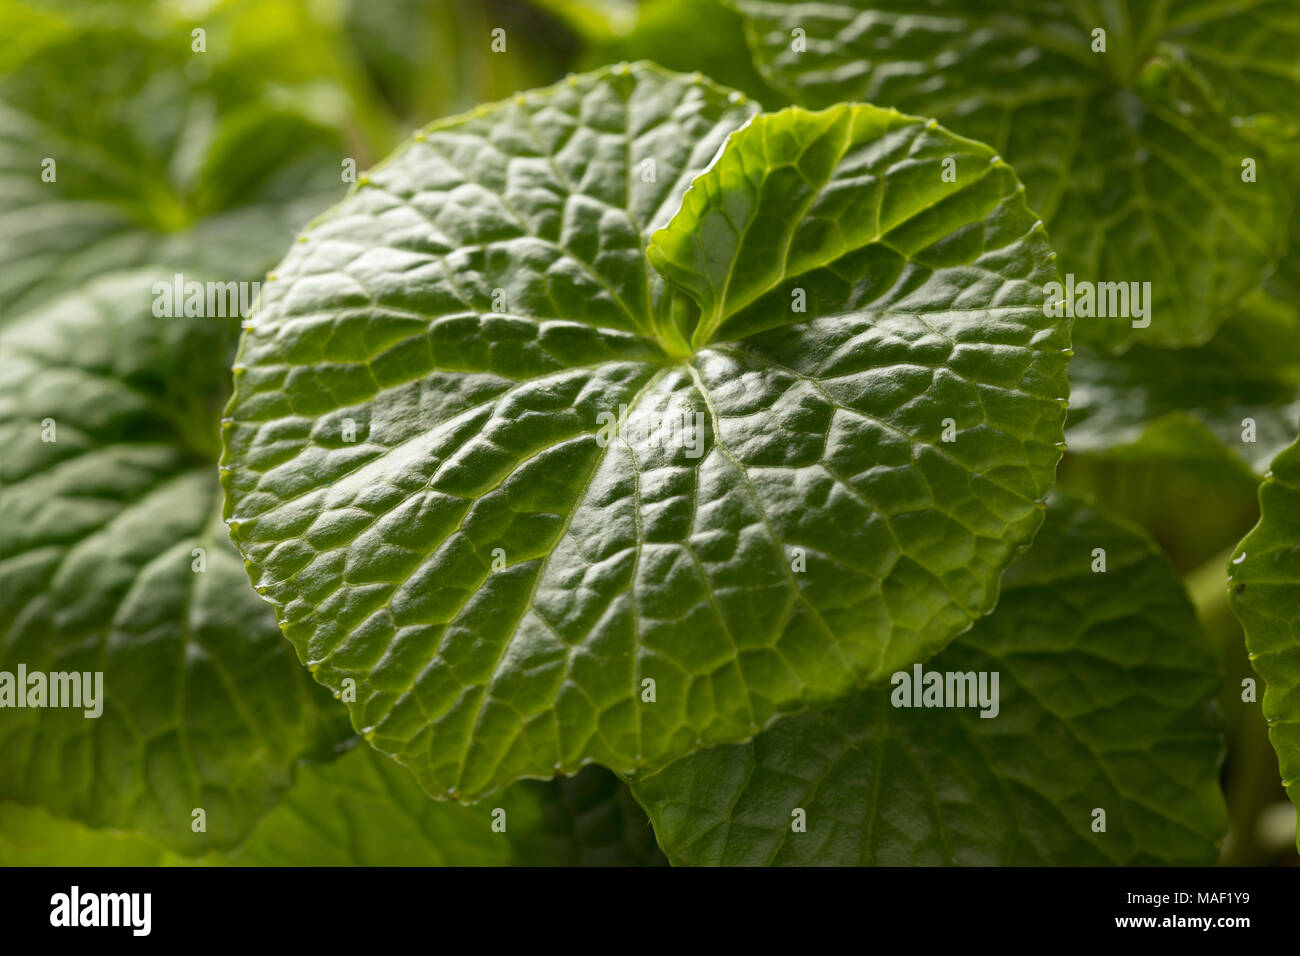 Fresh green leaf of a wasabi plant close up Stock Photo